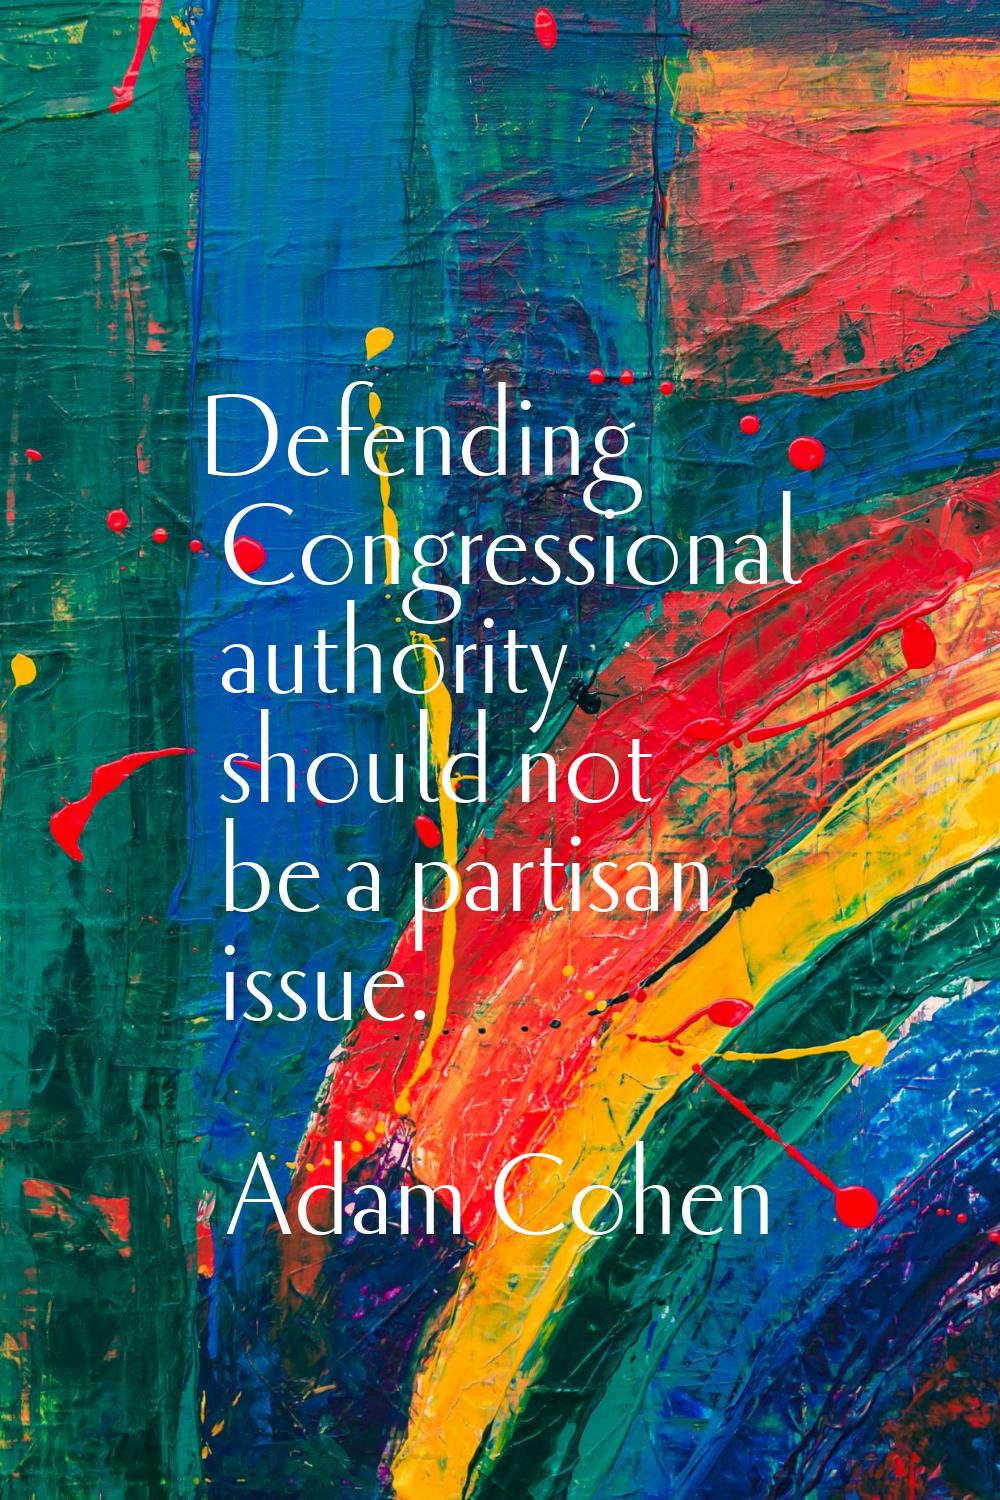 Defending Congressional authority should not be a partisan issue.